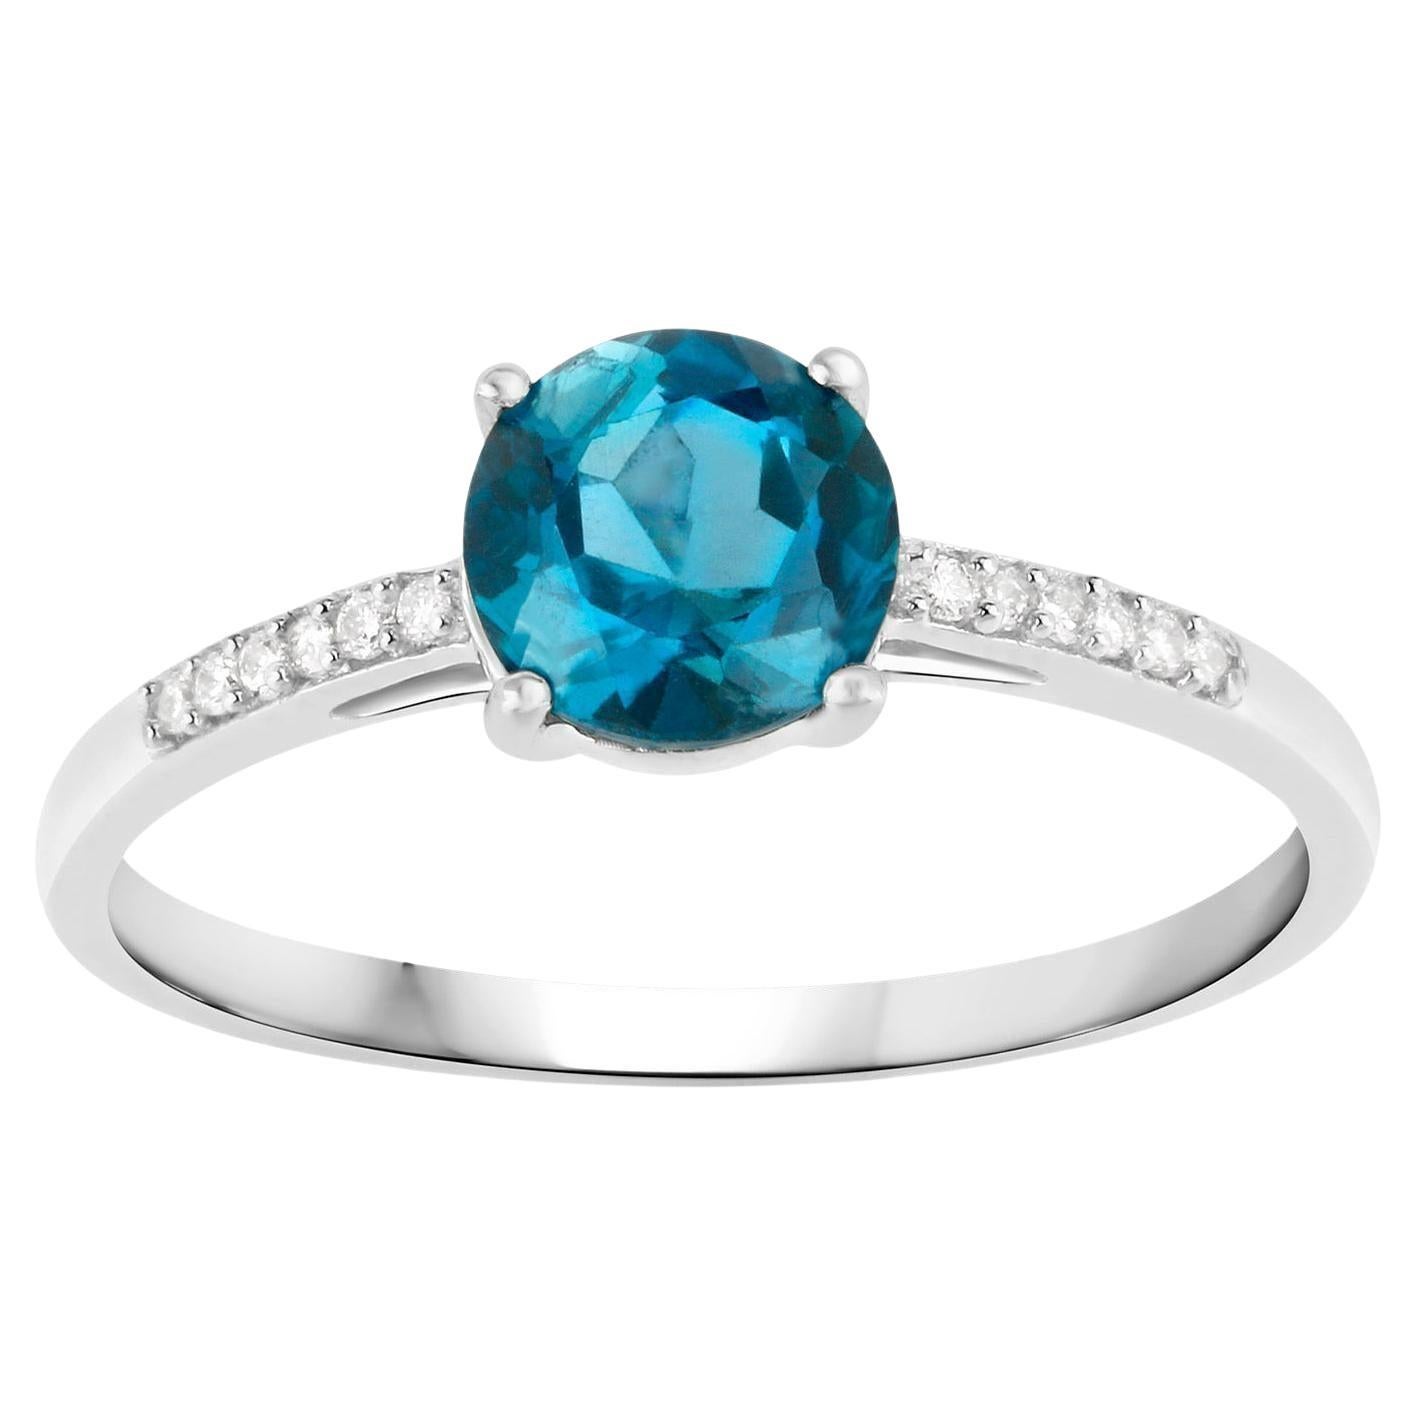 London Blue Topaz Ring With Diamonds 1.05 Carats 14K White Gold For Sale